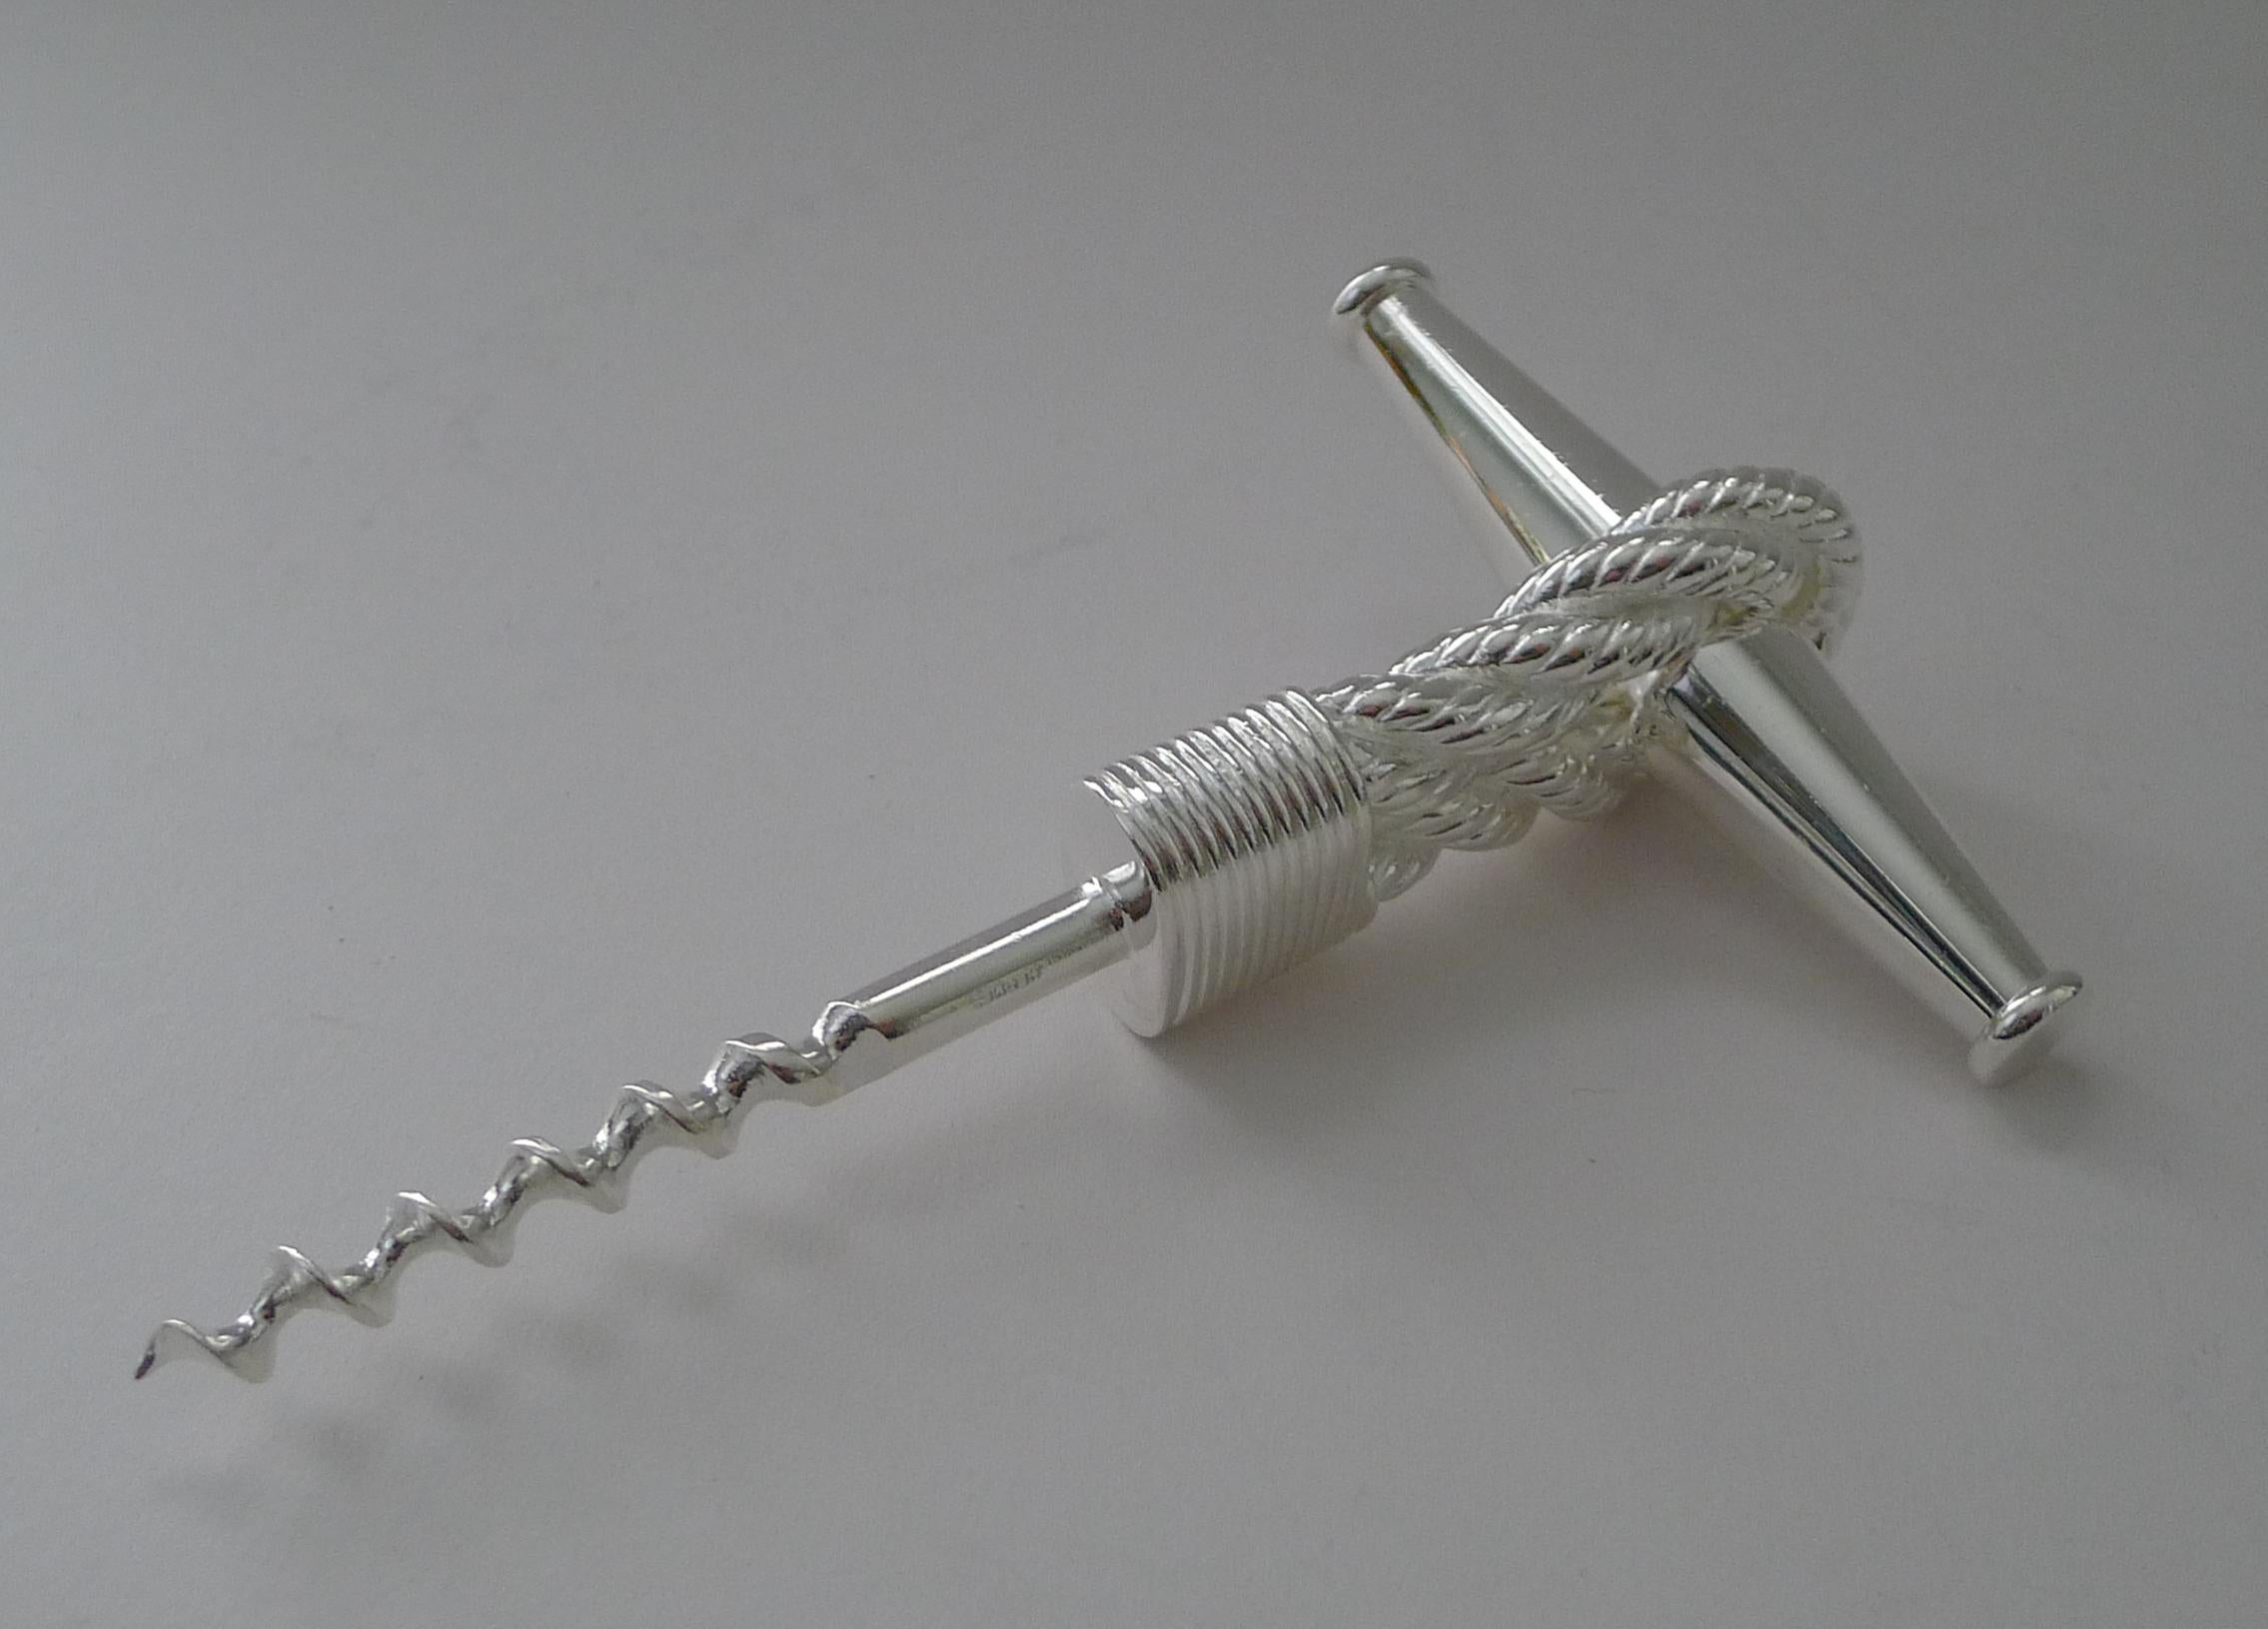 A rare and highly sought-after corkscrew in silver plated bronze from the 